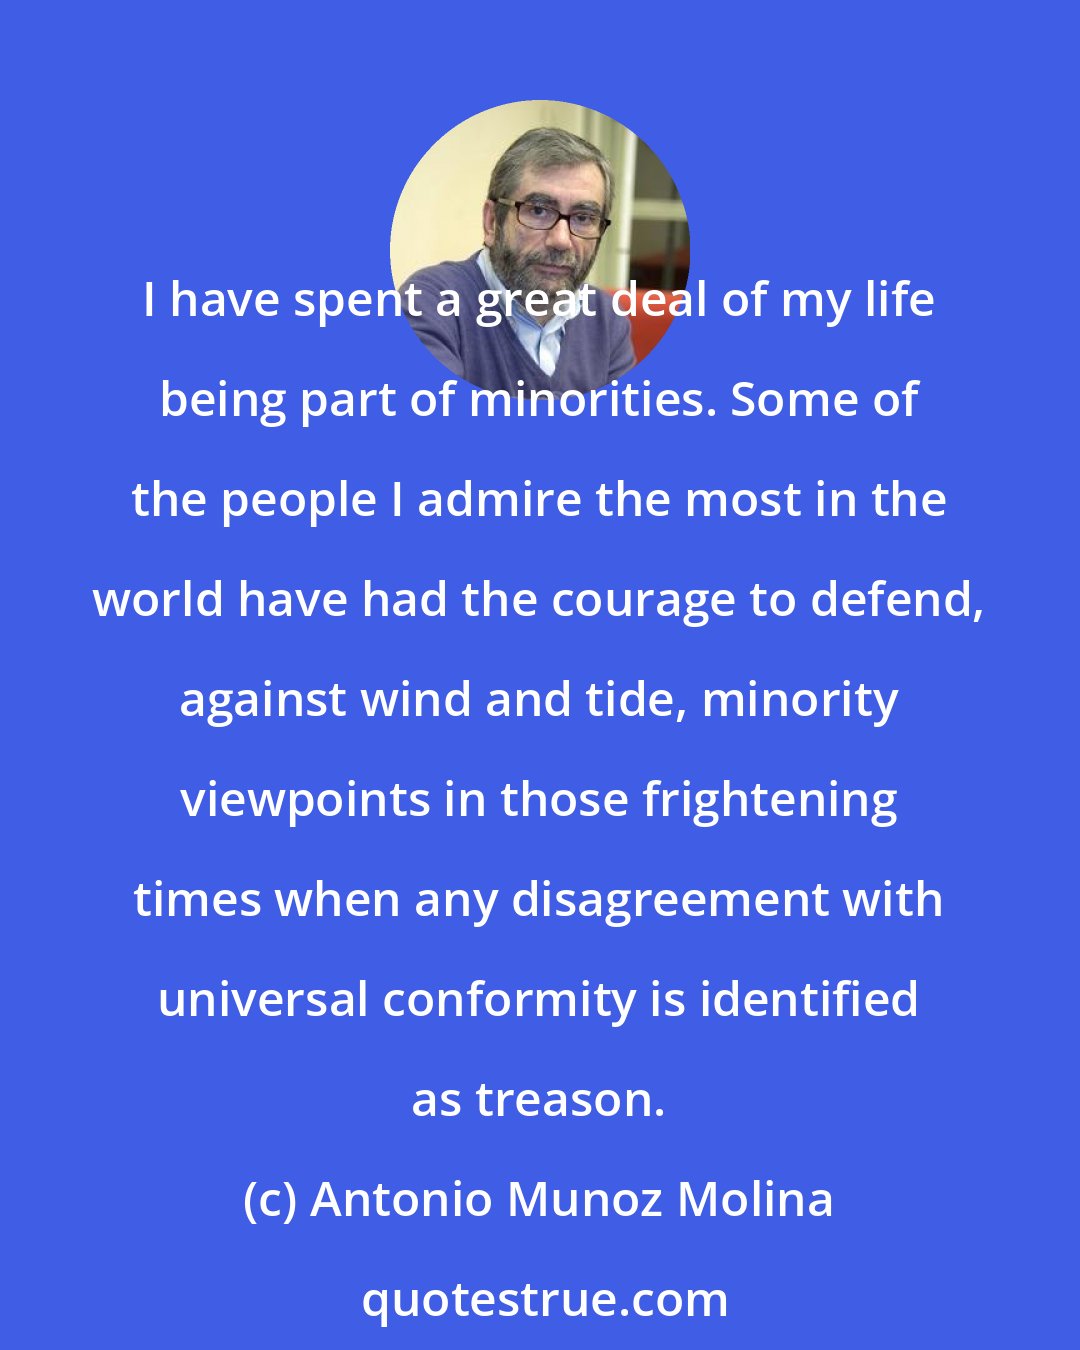 Antonio Munoz Molina: I have spent a great deal of my life being part of minorities. Some of the people I admire the most in the world have had the courage to defend, against wind and tide, minority viewpoints in those frightening times when any disagreement with universal conformity is identified as treason.